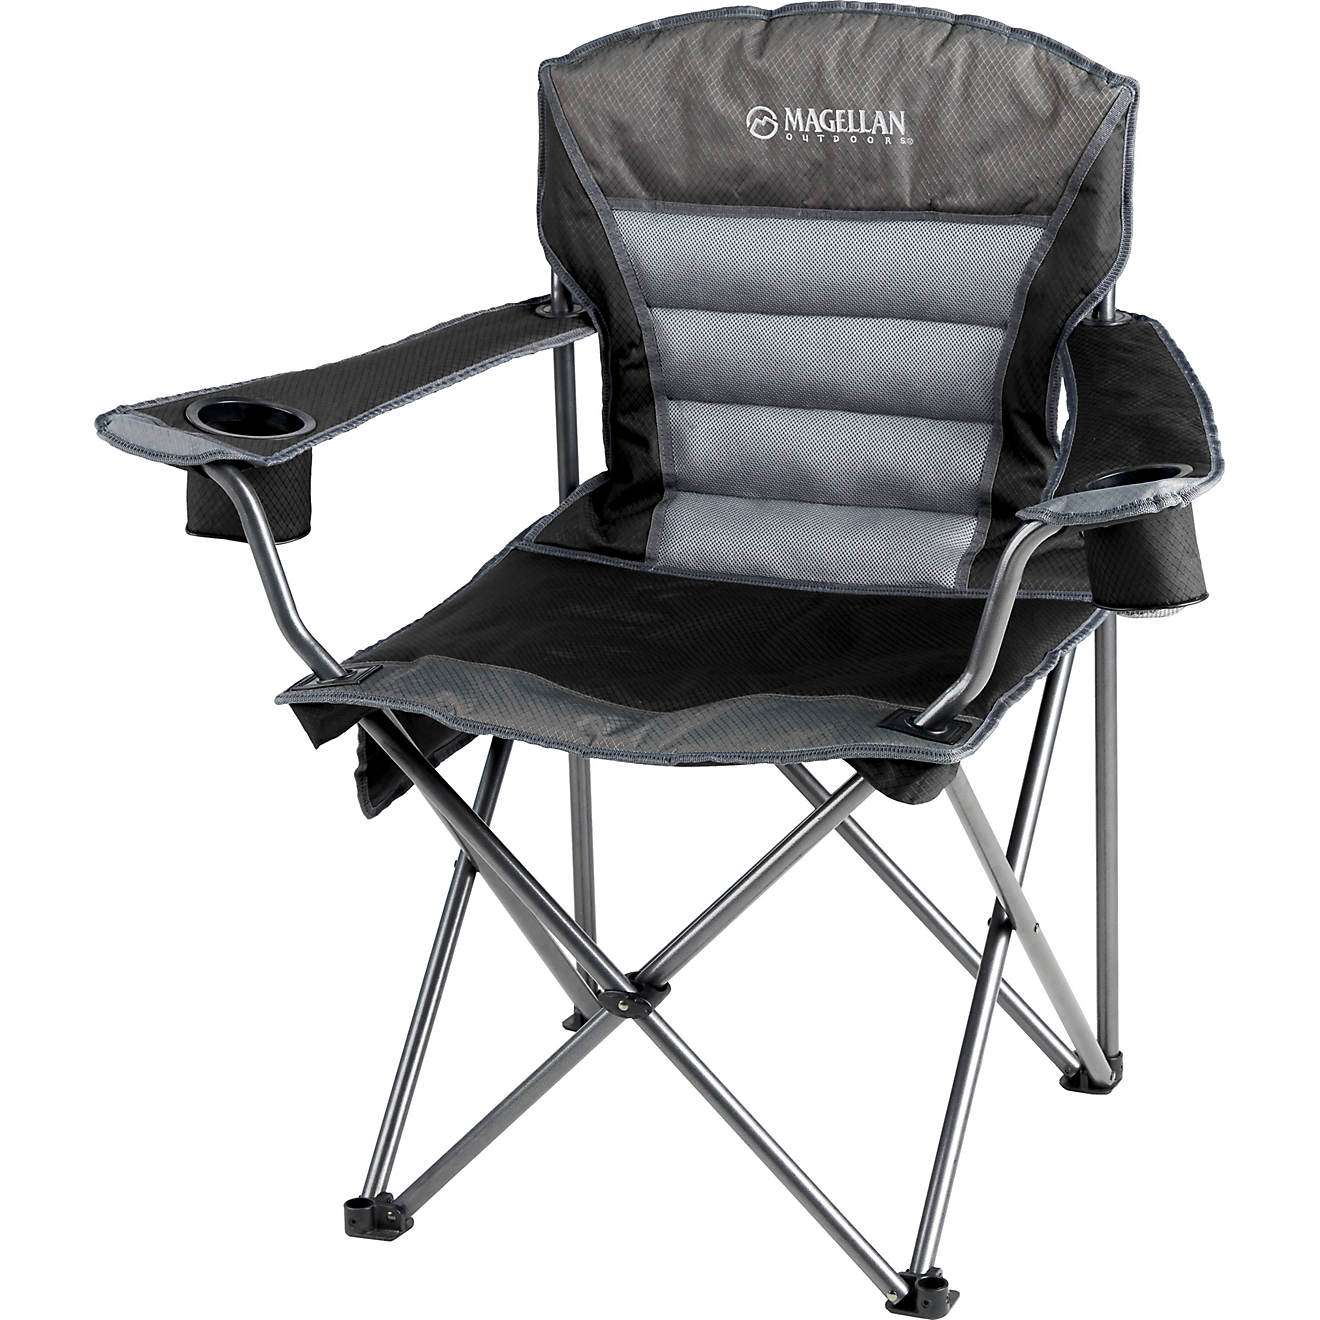 <p><strong>Magellan Outdoors Oversized Ultra Comfort Padded Mesh Chair</strong><br> Whether you're in a ground blind or tailgating for the big game, having a comfy folding chair is a fall must. Magellan's Oversized Ultra Comfortable Padded Mesh Chair is going to keep you comfy all fall. <a href=